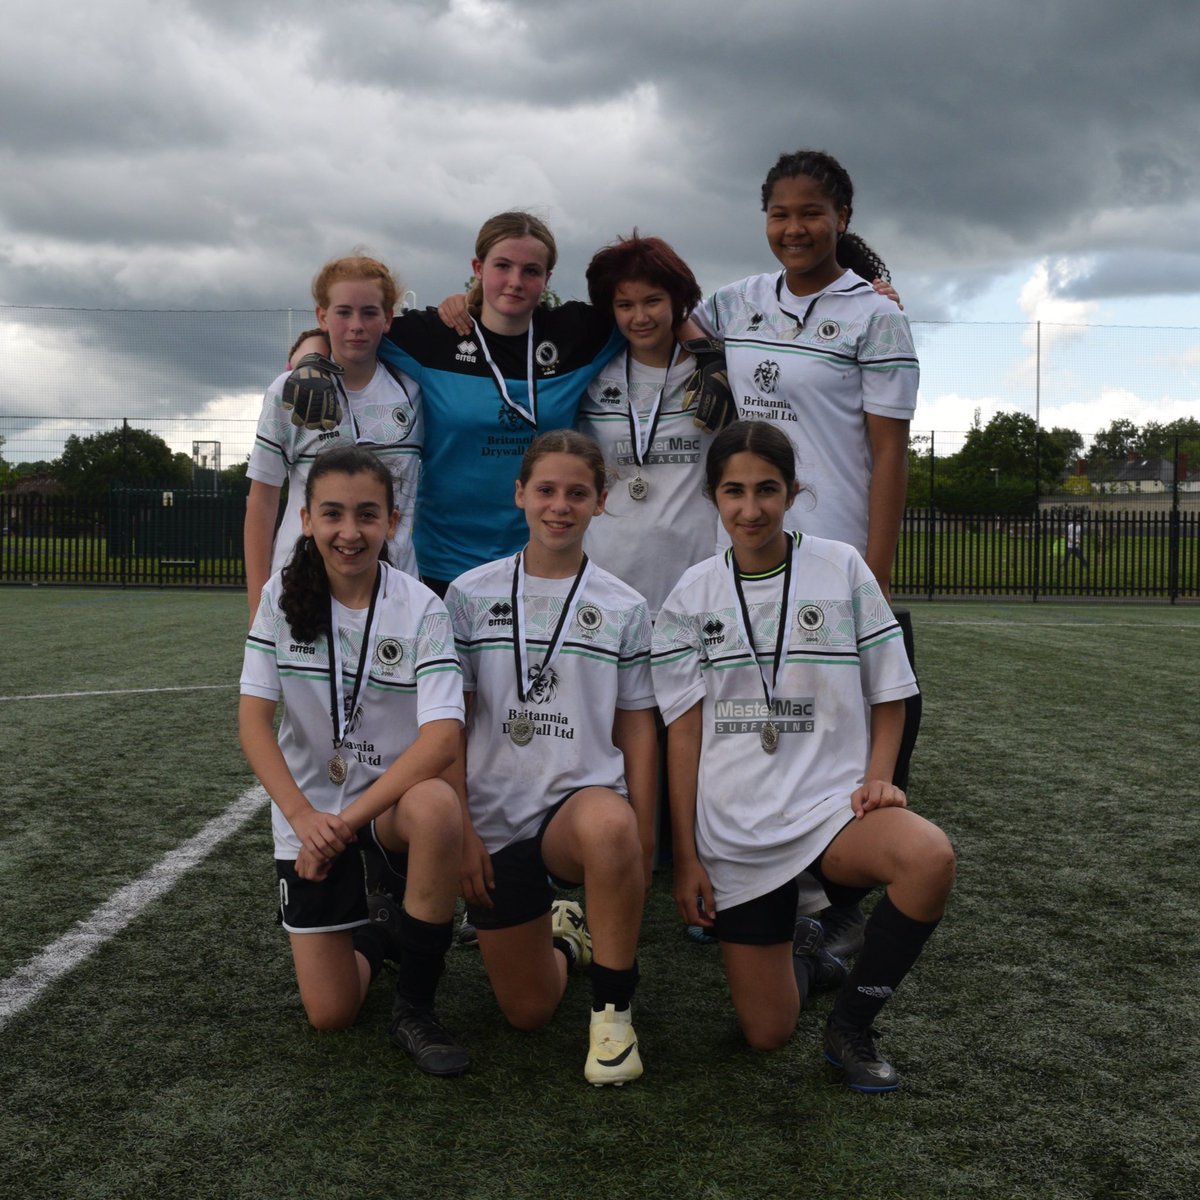 🏆 Summer Youth Tournament

Our first final of the afternoon competitions is complete 

U13 Girls👇

🥇Club FSP
🥈Borehamwood 2000

👏 Well done to everyone who took part

#WeAreTheWood